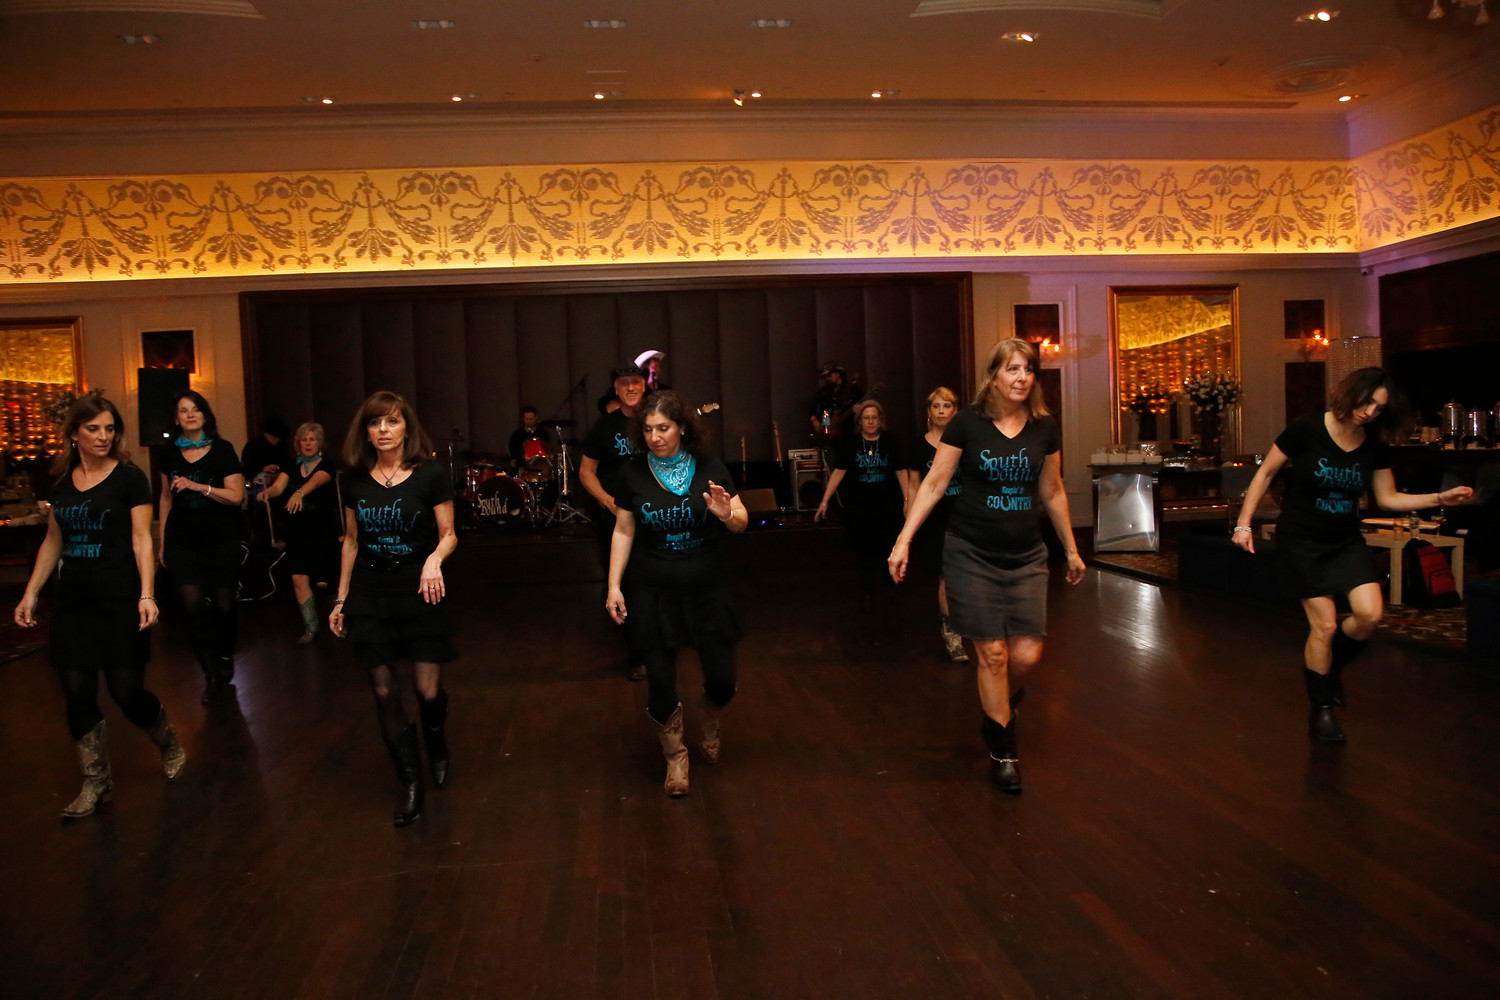 The SouthBound troupe demonstrated country line dancing at the Kulanu dinner.